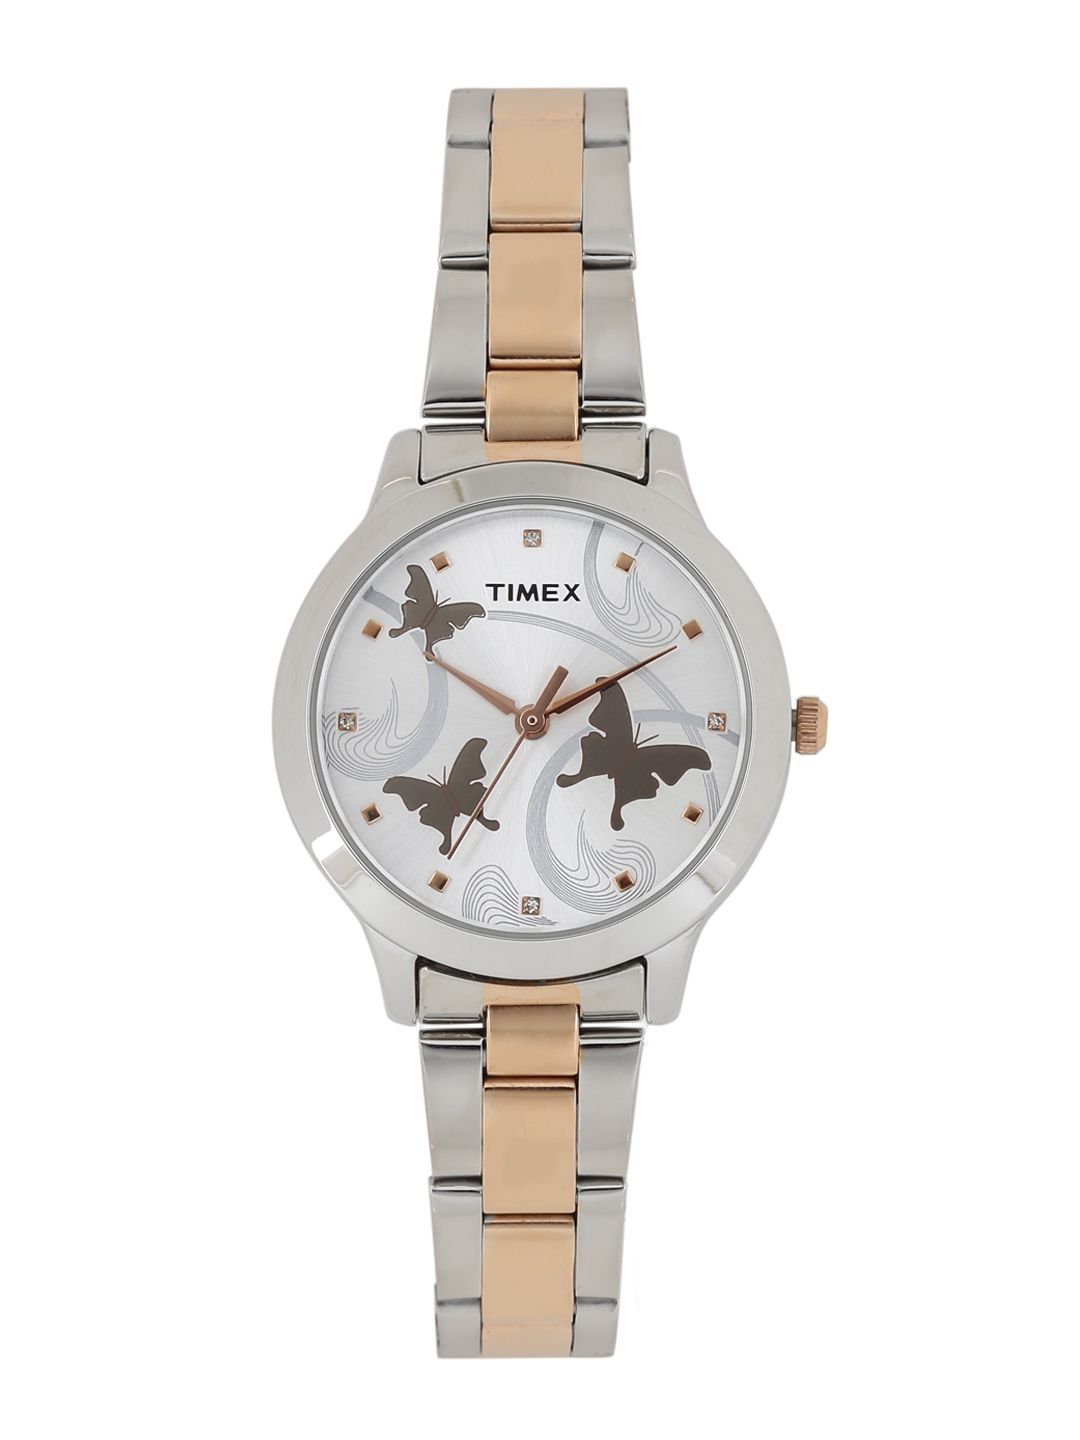 Timex Women Silver-Toned Analogue Watch - TW000T607 Price in India